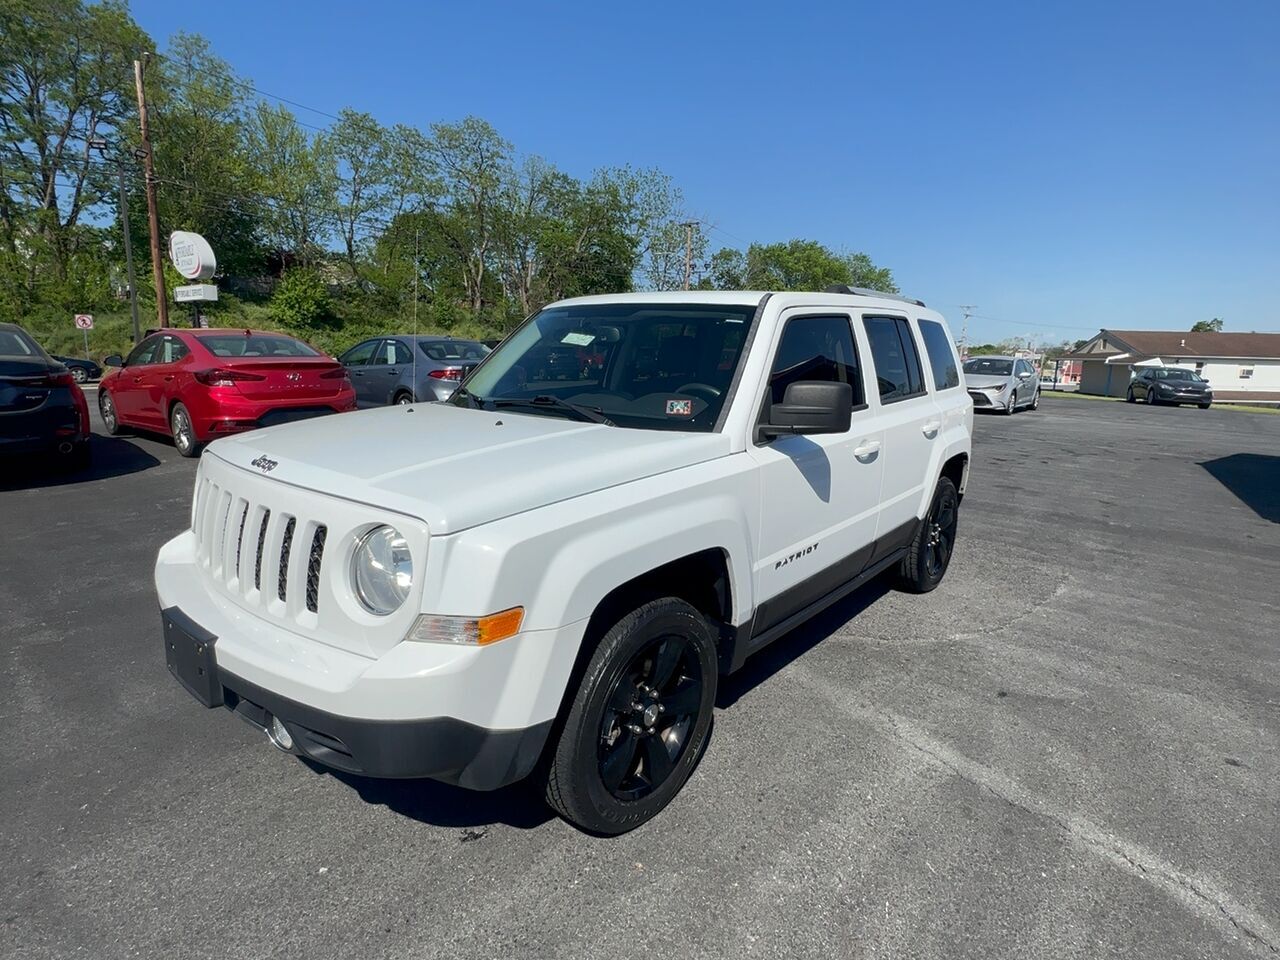 2015 Jeep Patriot Limited